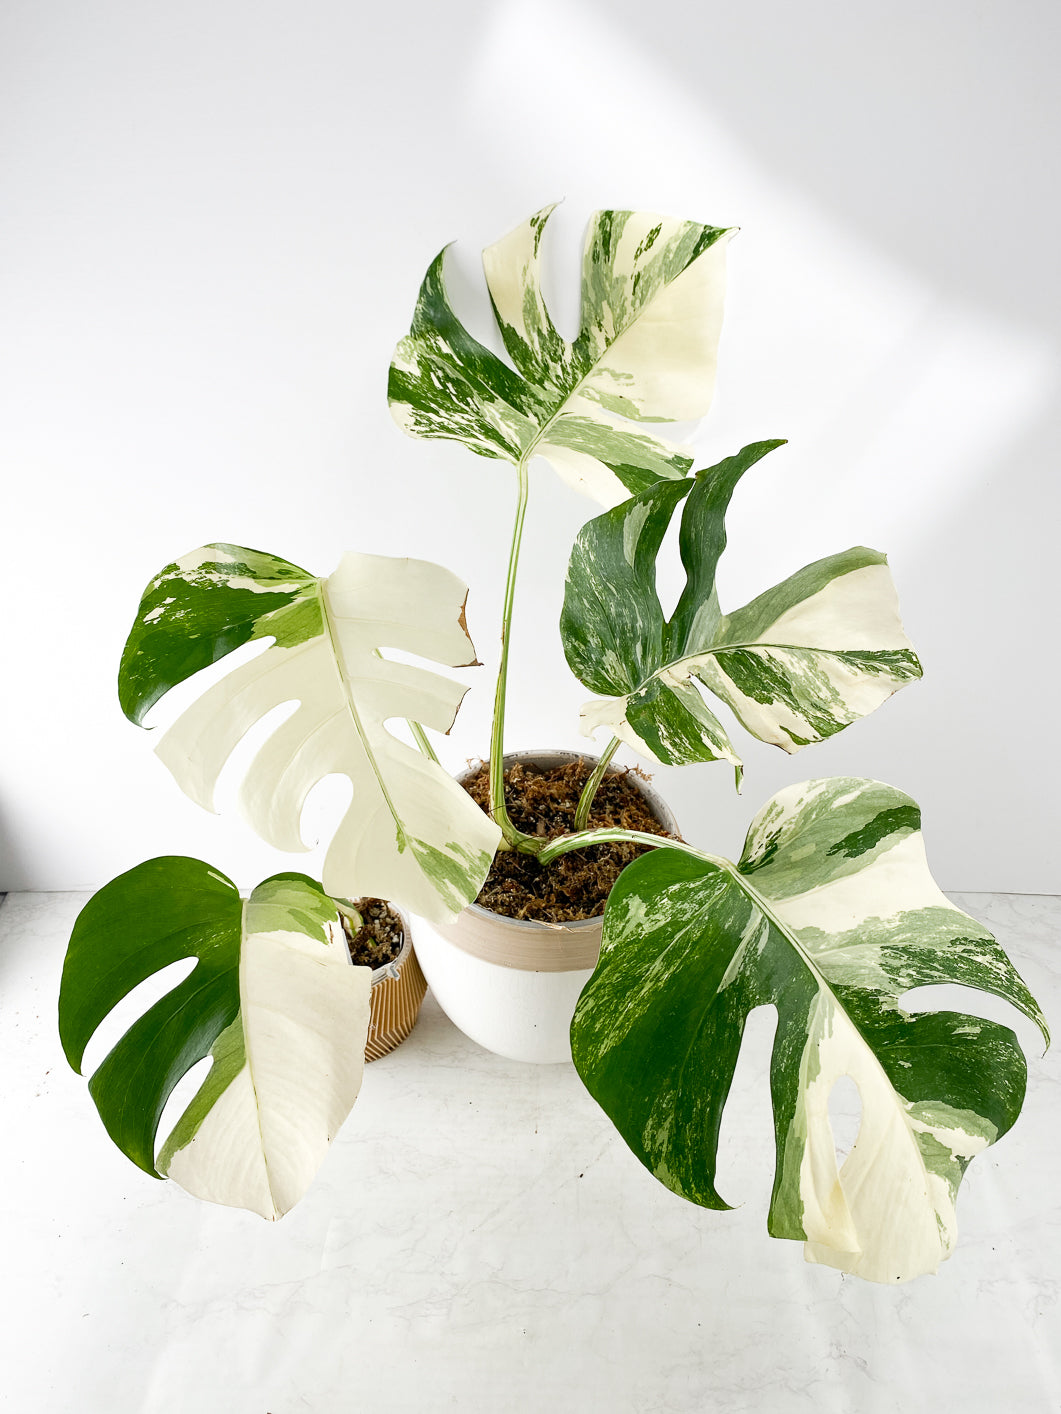 Monstera albo variegata White Tiger Rooted 1 leaf multiple nodes Slightly Rooted Top Cutting